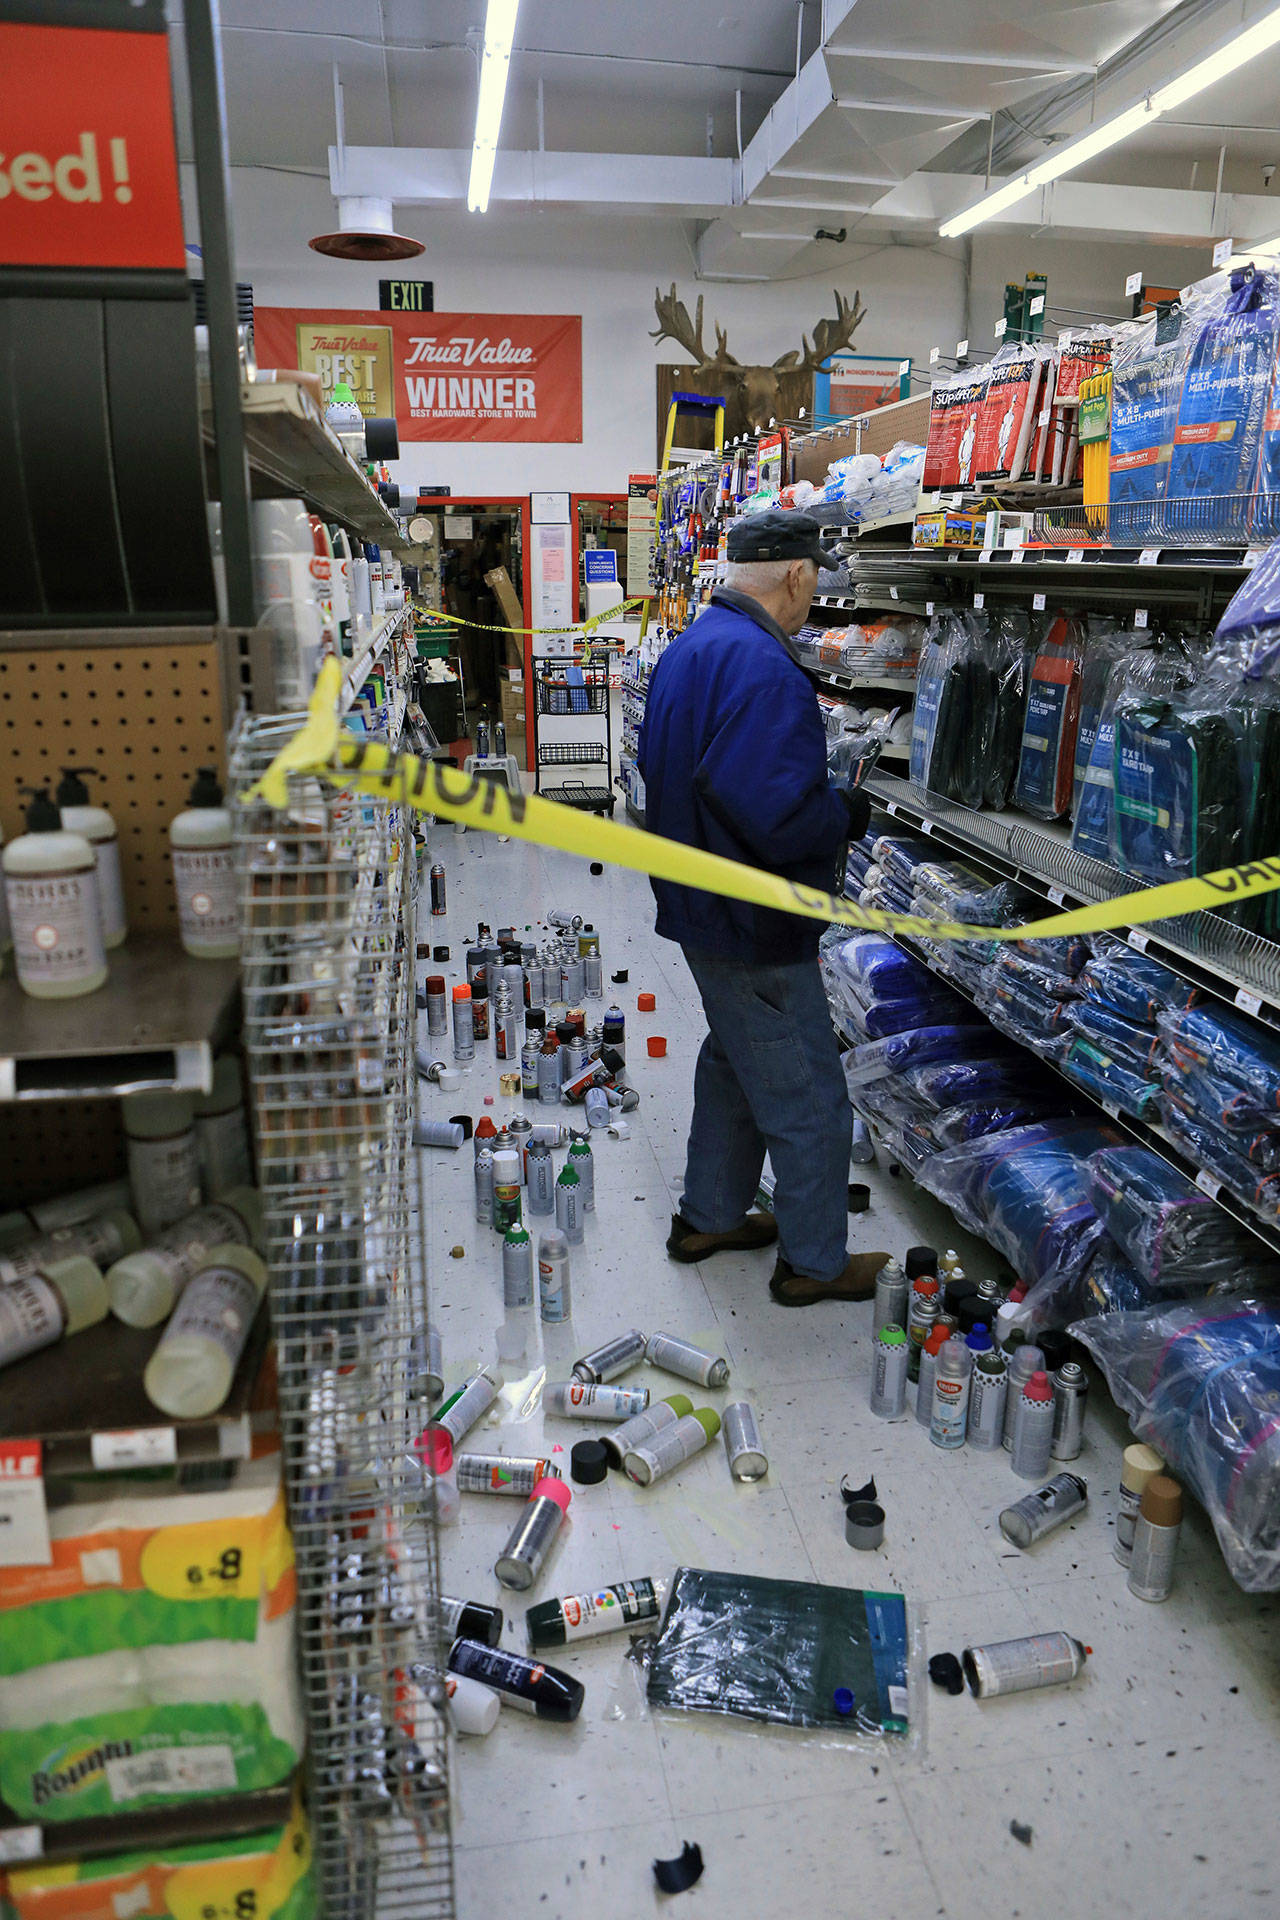 A customer at Anchorage True Value hardware store shops in the partially cleaned up paint aisle after an earthquake Friday morning in Anchorage, Alaska. Tim Craig, owner of the south Anchorage store, said no one was injured but hundreds of items hit the floor and two shelves collapsed in a stock room. (Dan Joling/The Associated Press)